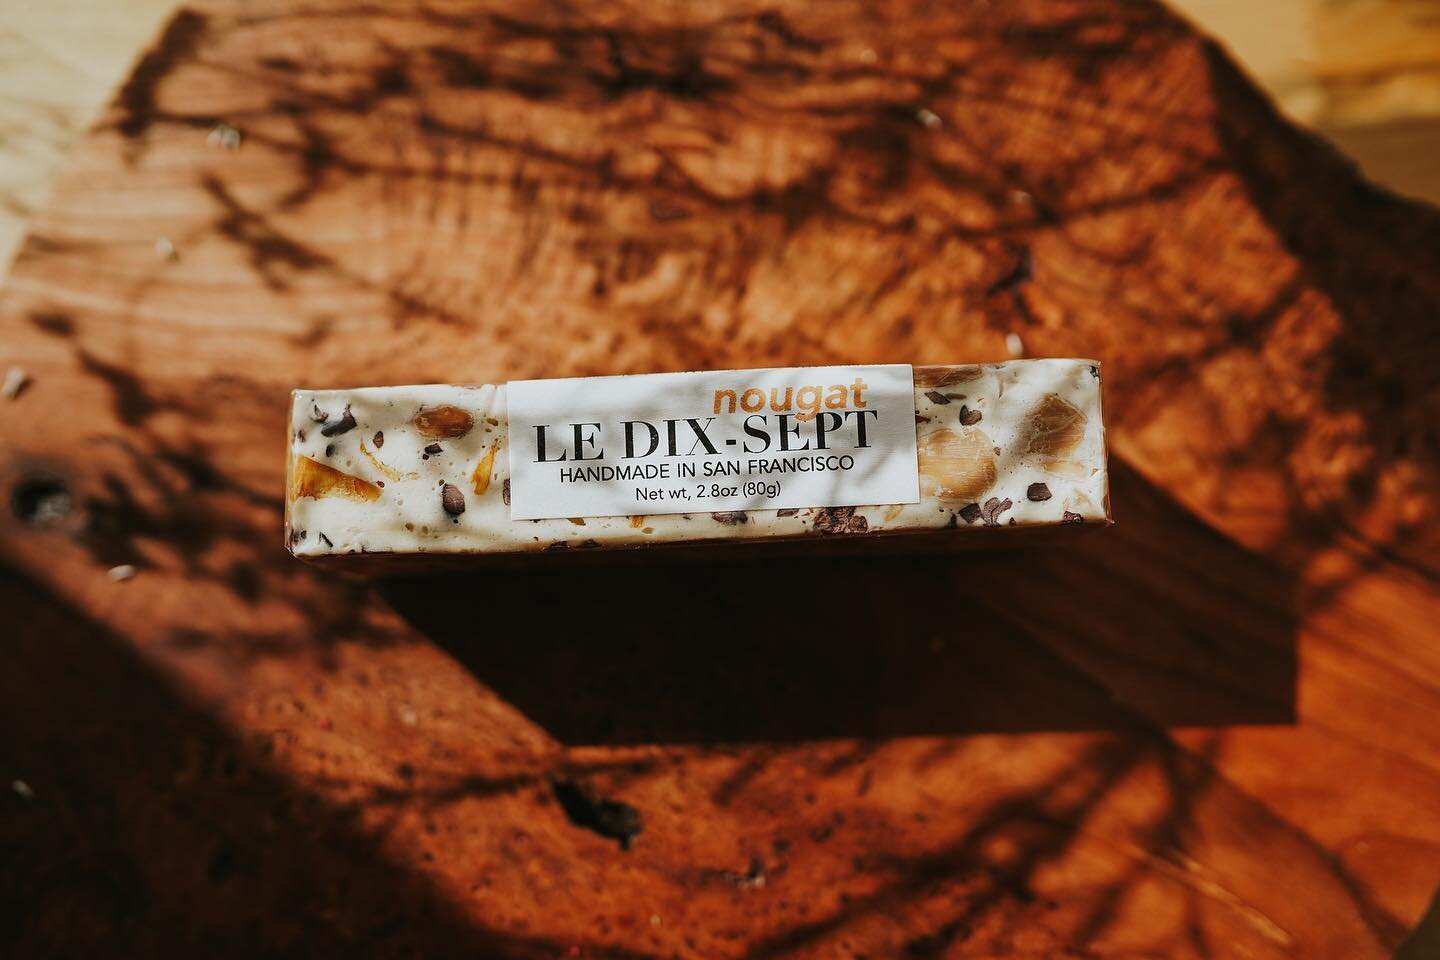 Le Dix Sept&rsquo;s nougat highlights the quality of the organic honey used to create the confection. The bar echoes the traditional style of European nougat and includes mango, cacao nibs, and almond 🍯